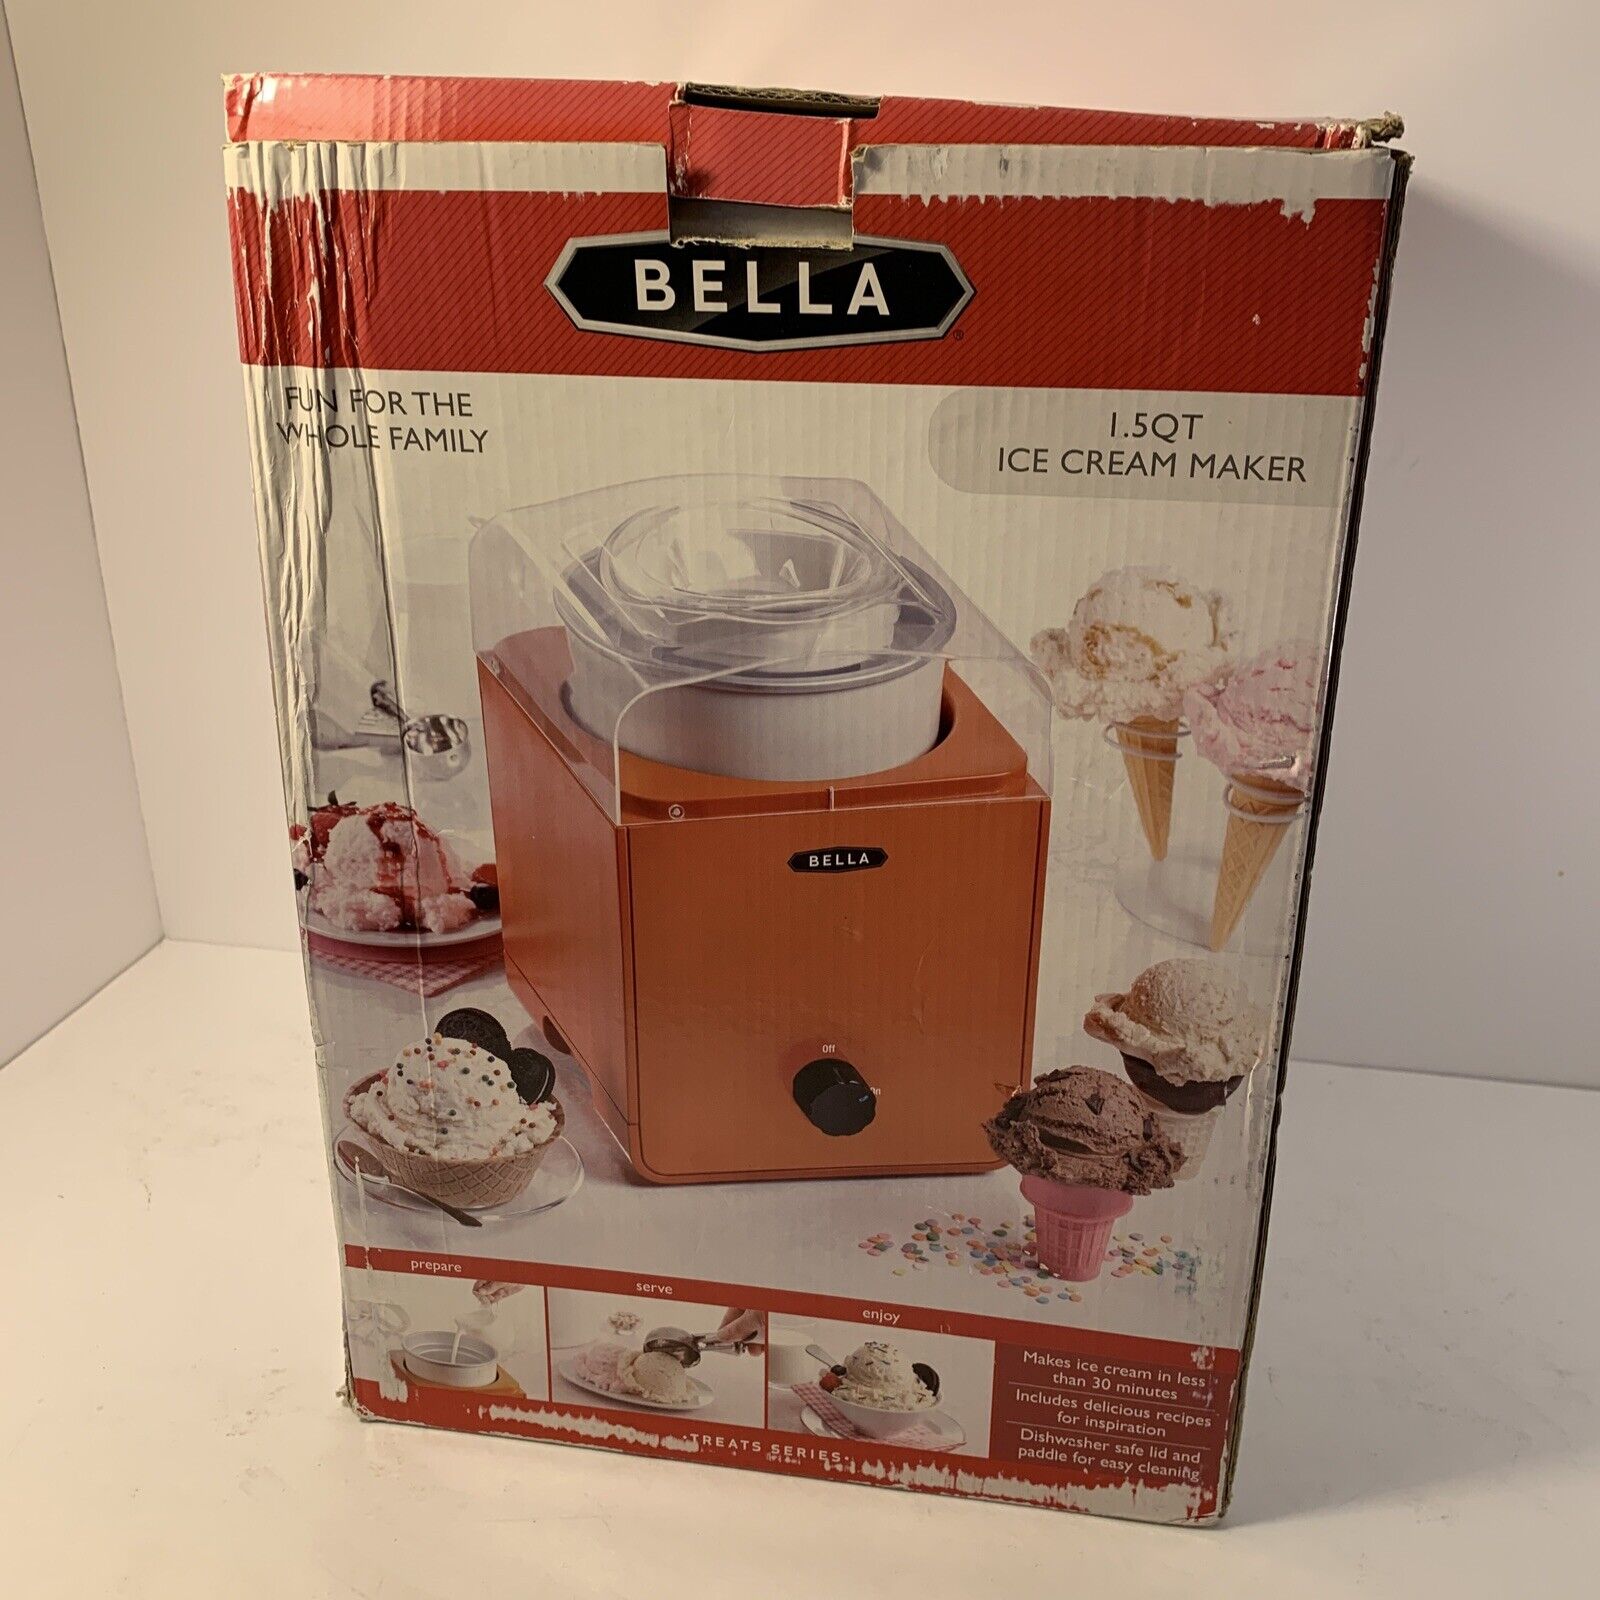 How To Use A Bella Ice Cream Maker